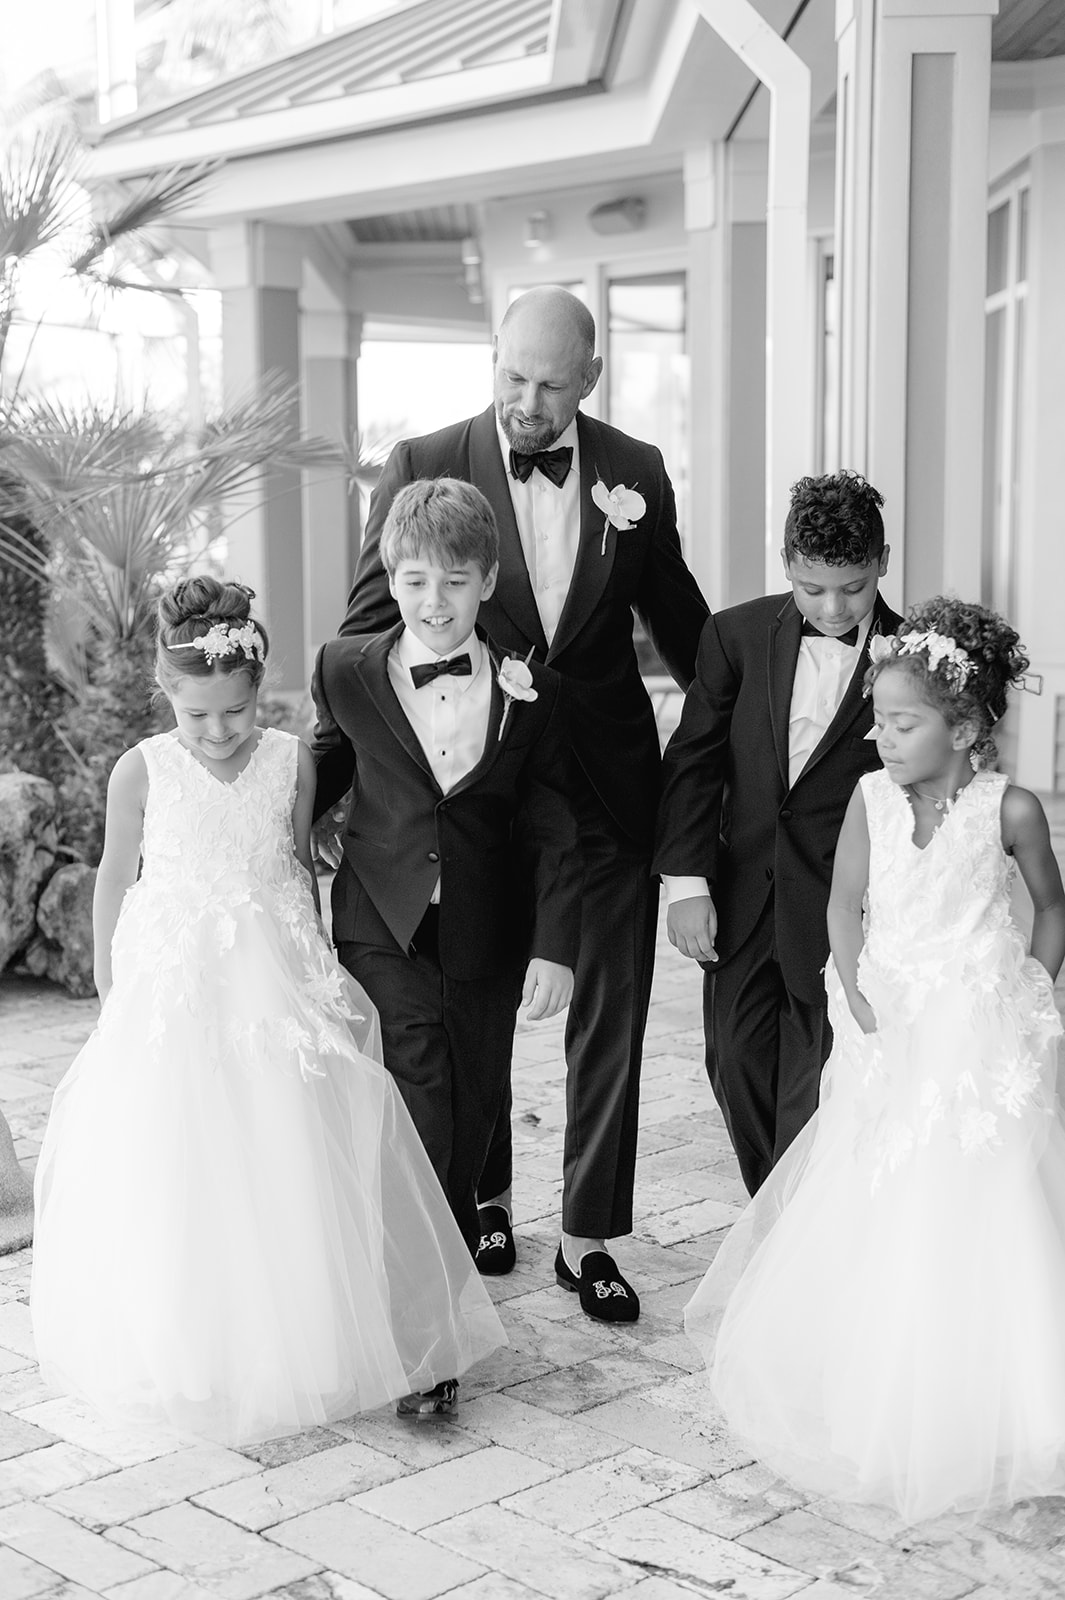 Exceptional Marco Island Wedding Photography Services - From Preparations to Reception
